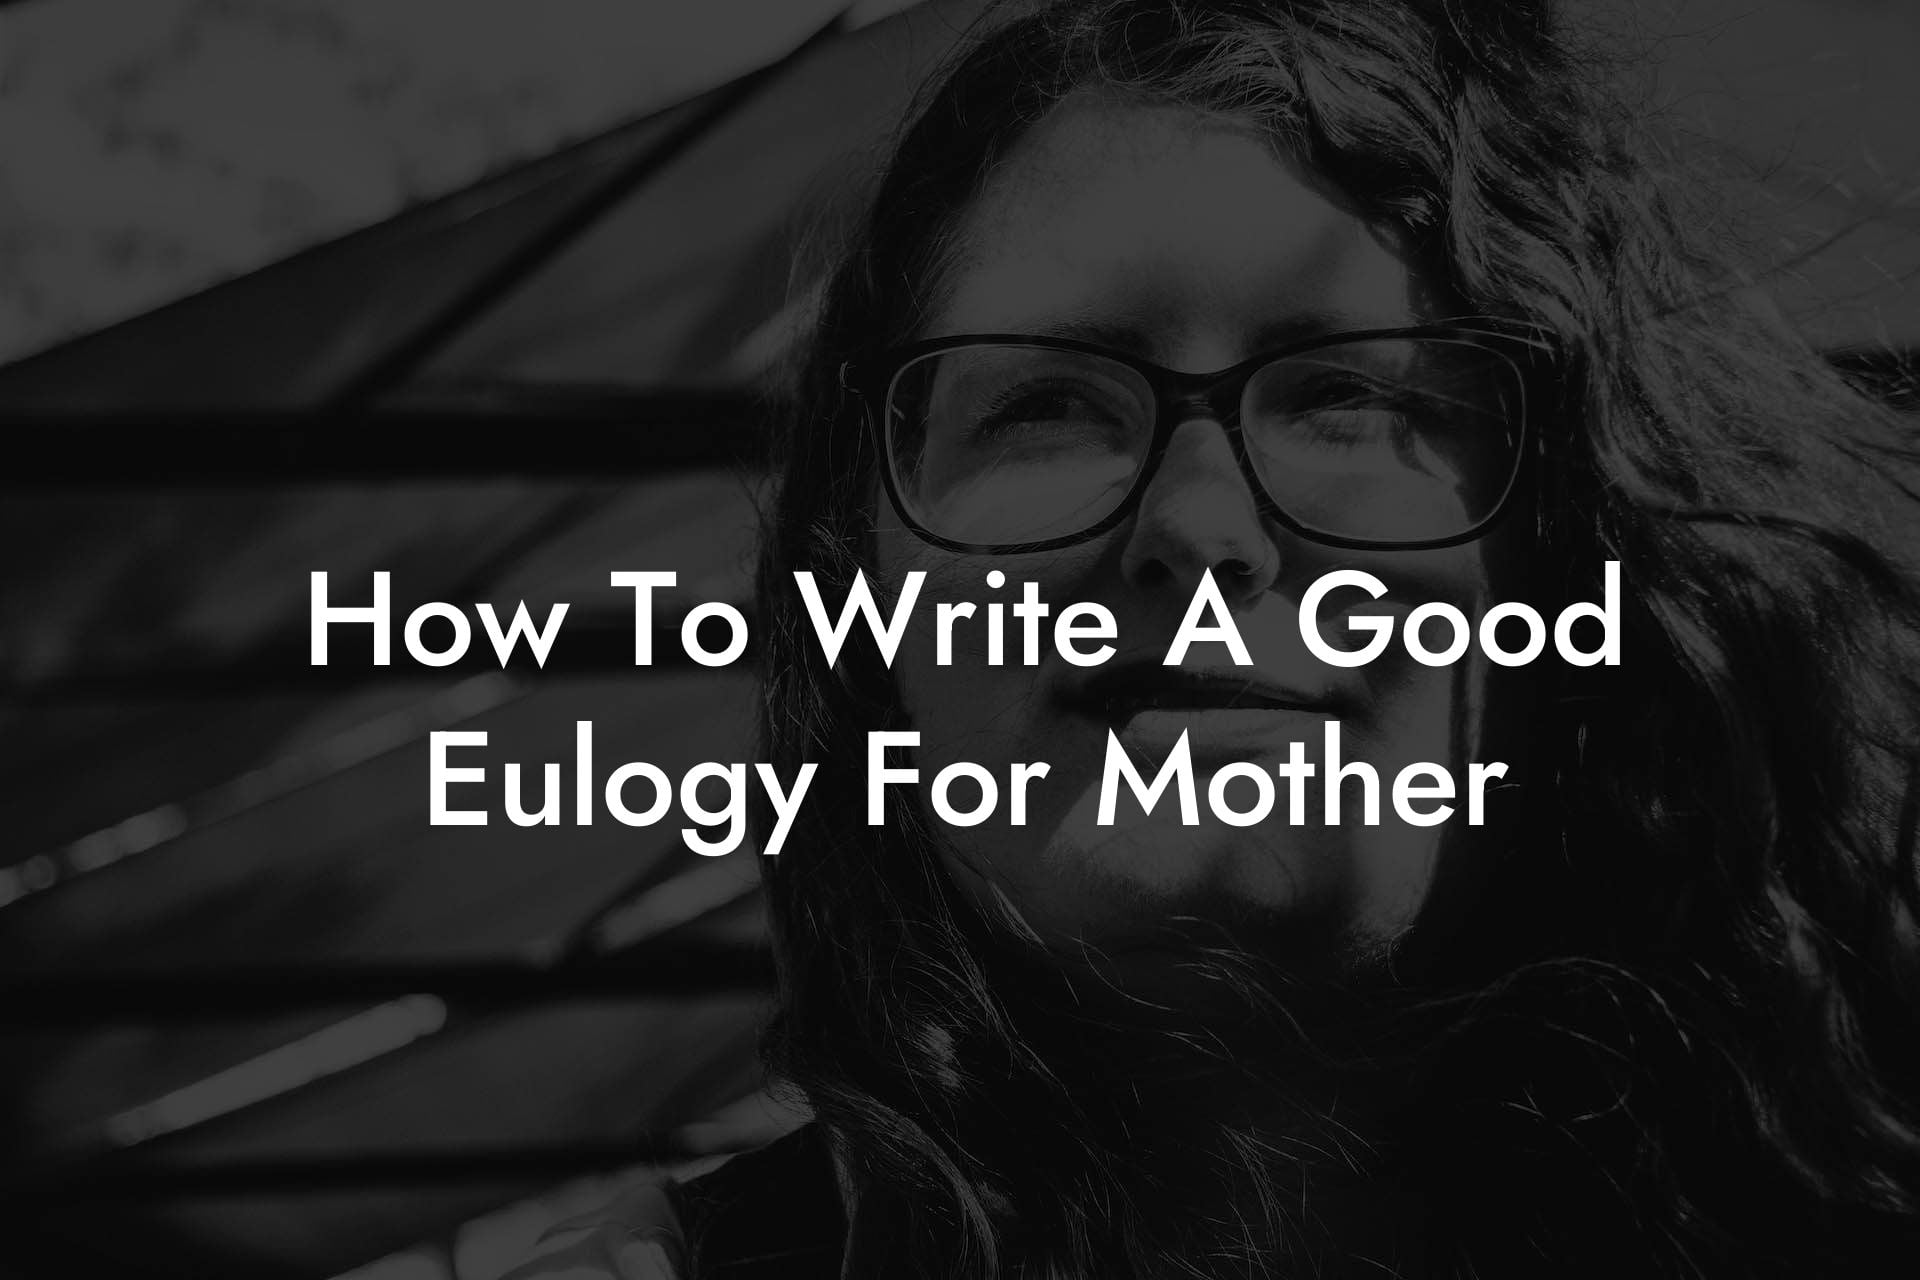 How To Write A Good Eulogy For Mother